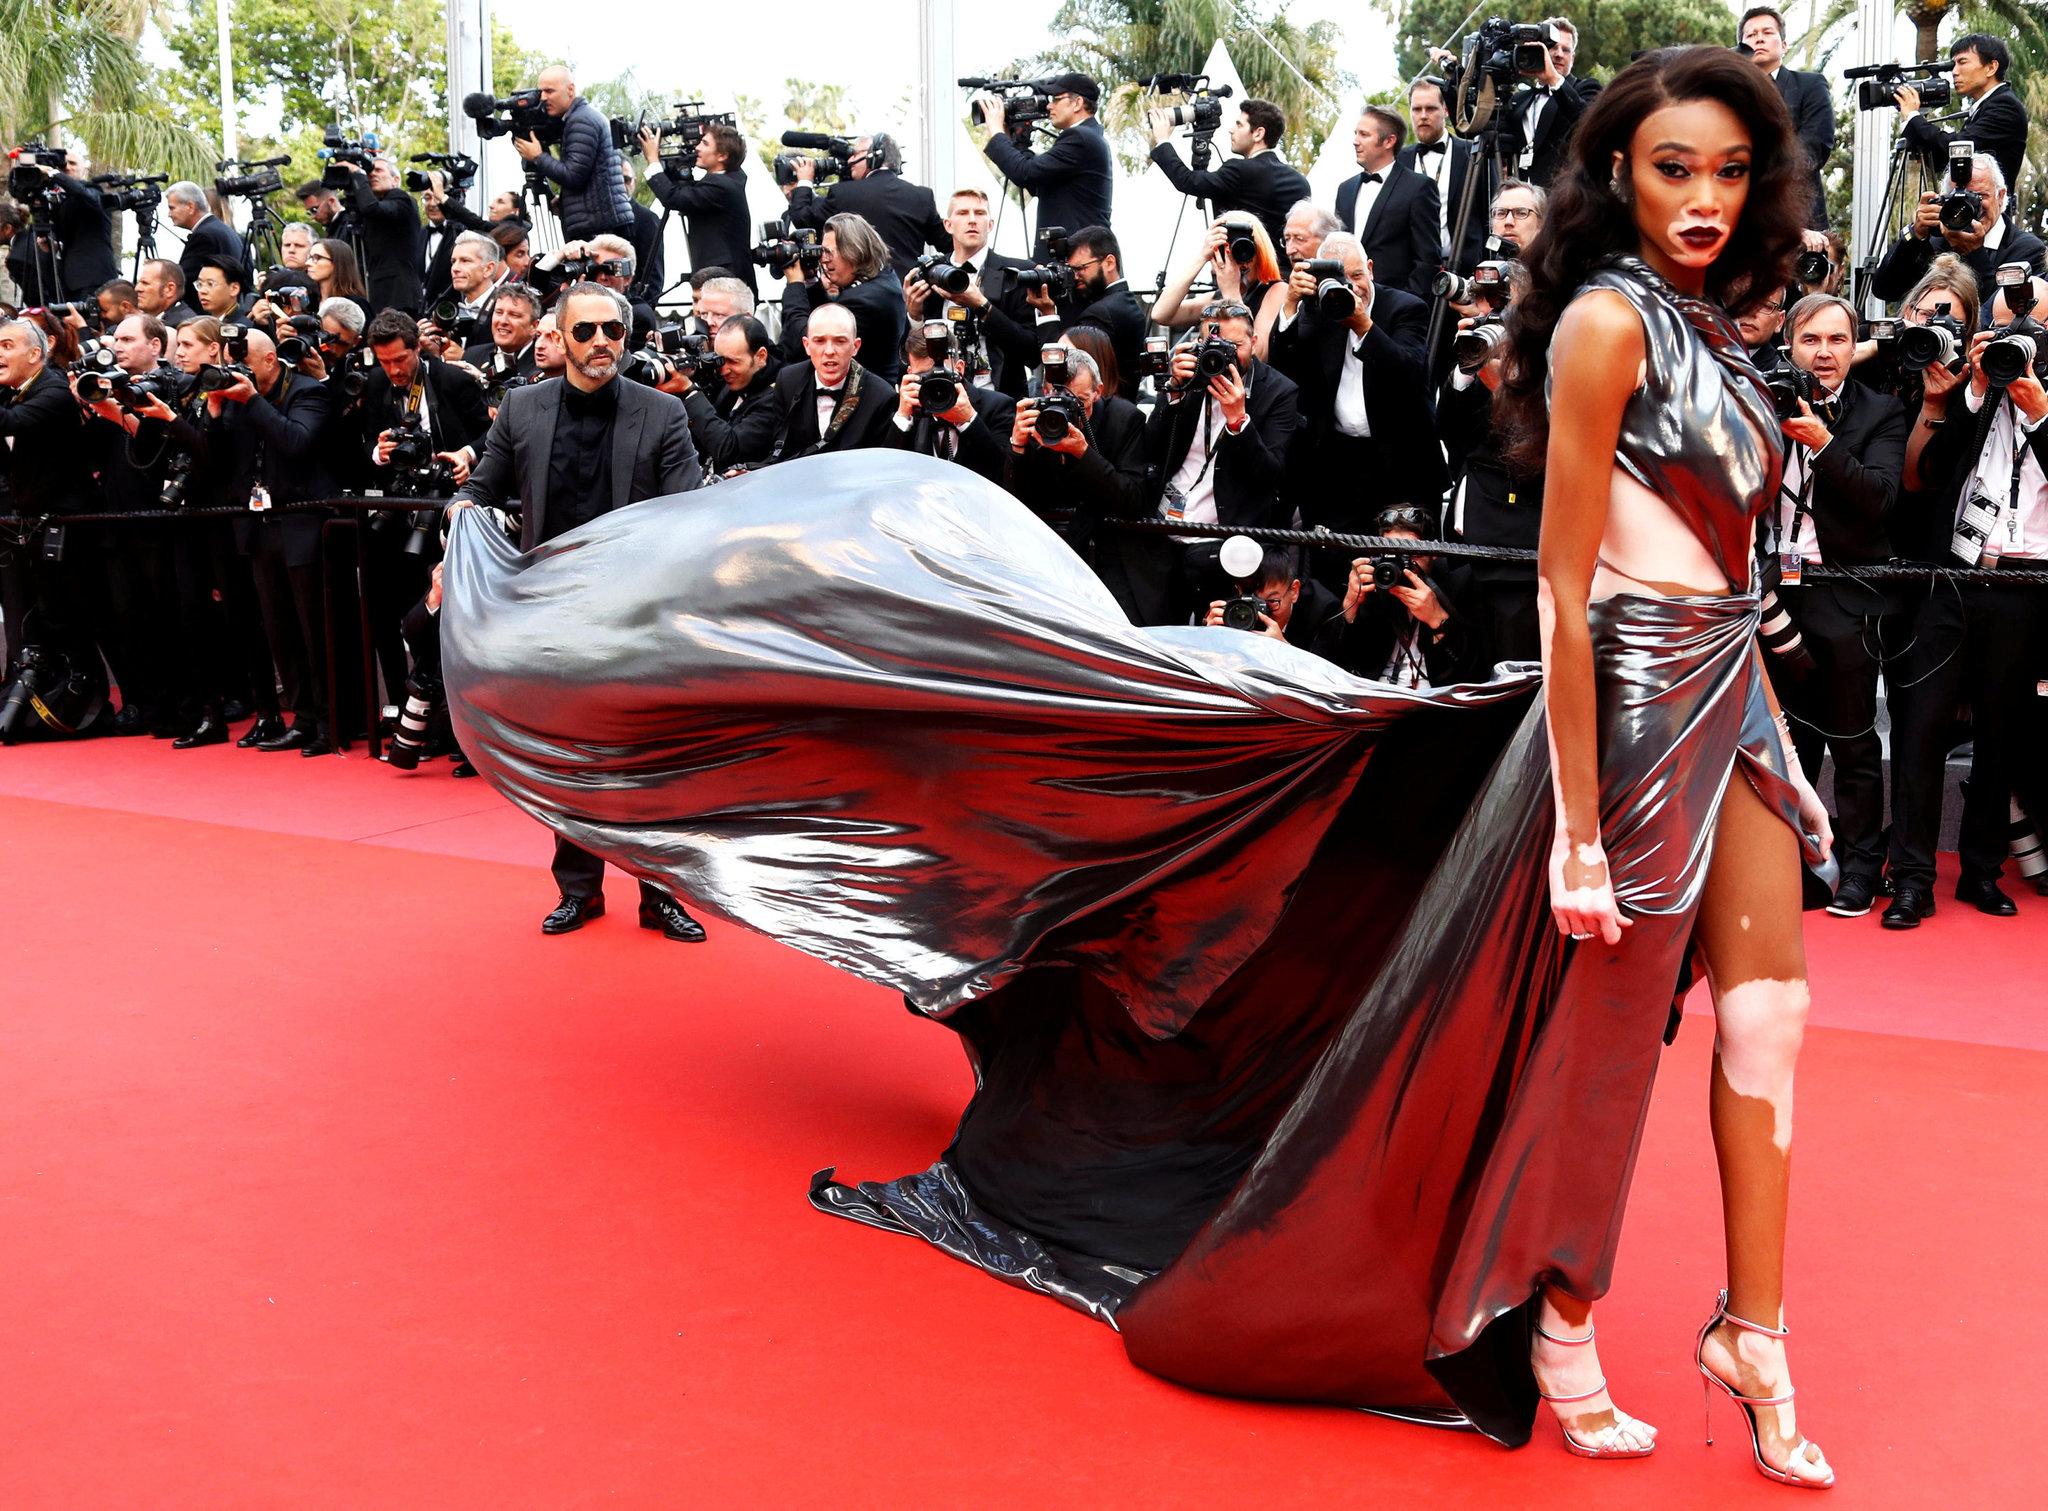 Protest, Glamour and Drama: 11 Snapshots From the Cannes Red Carpet ...